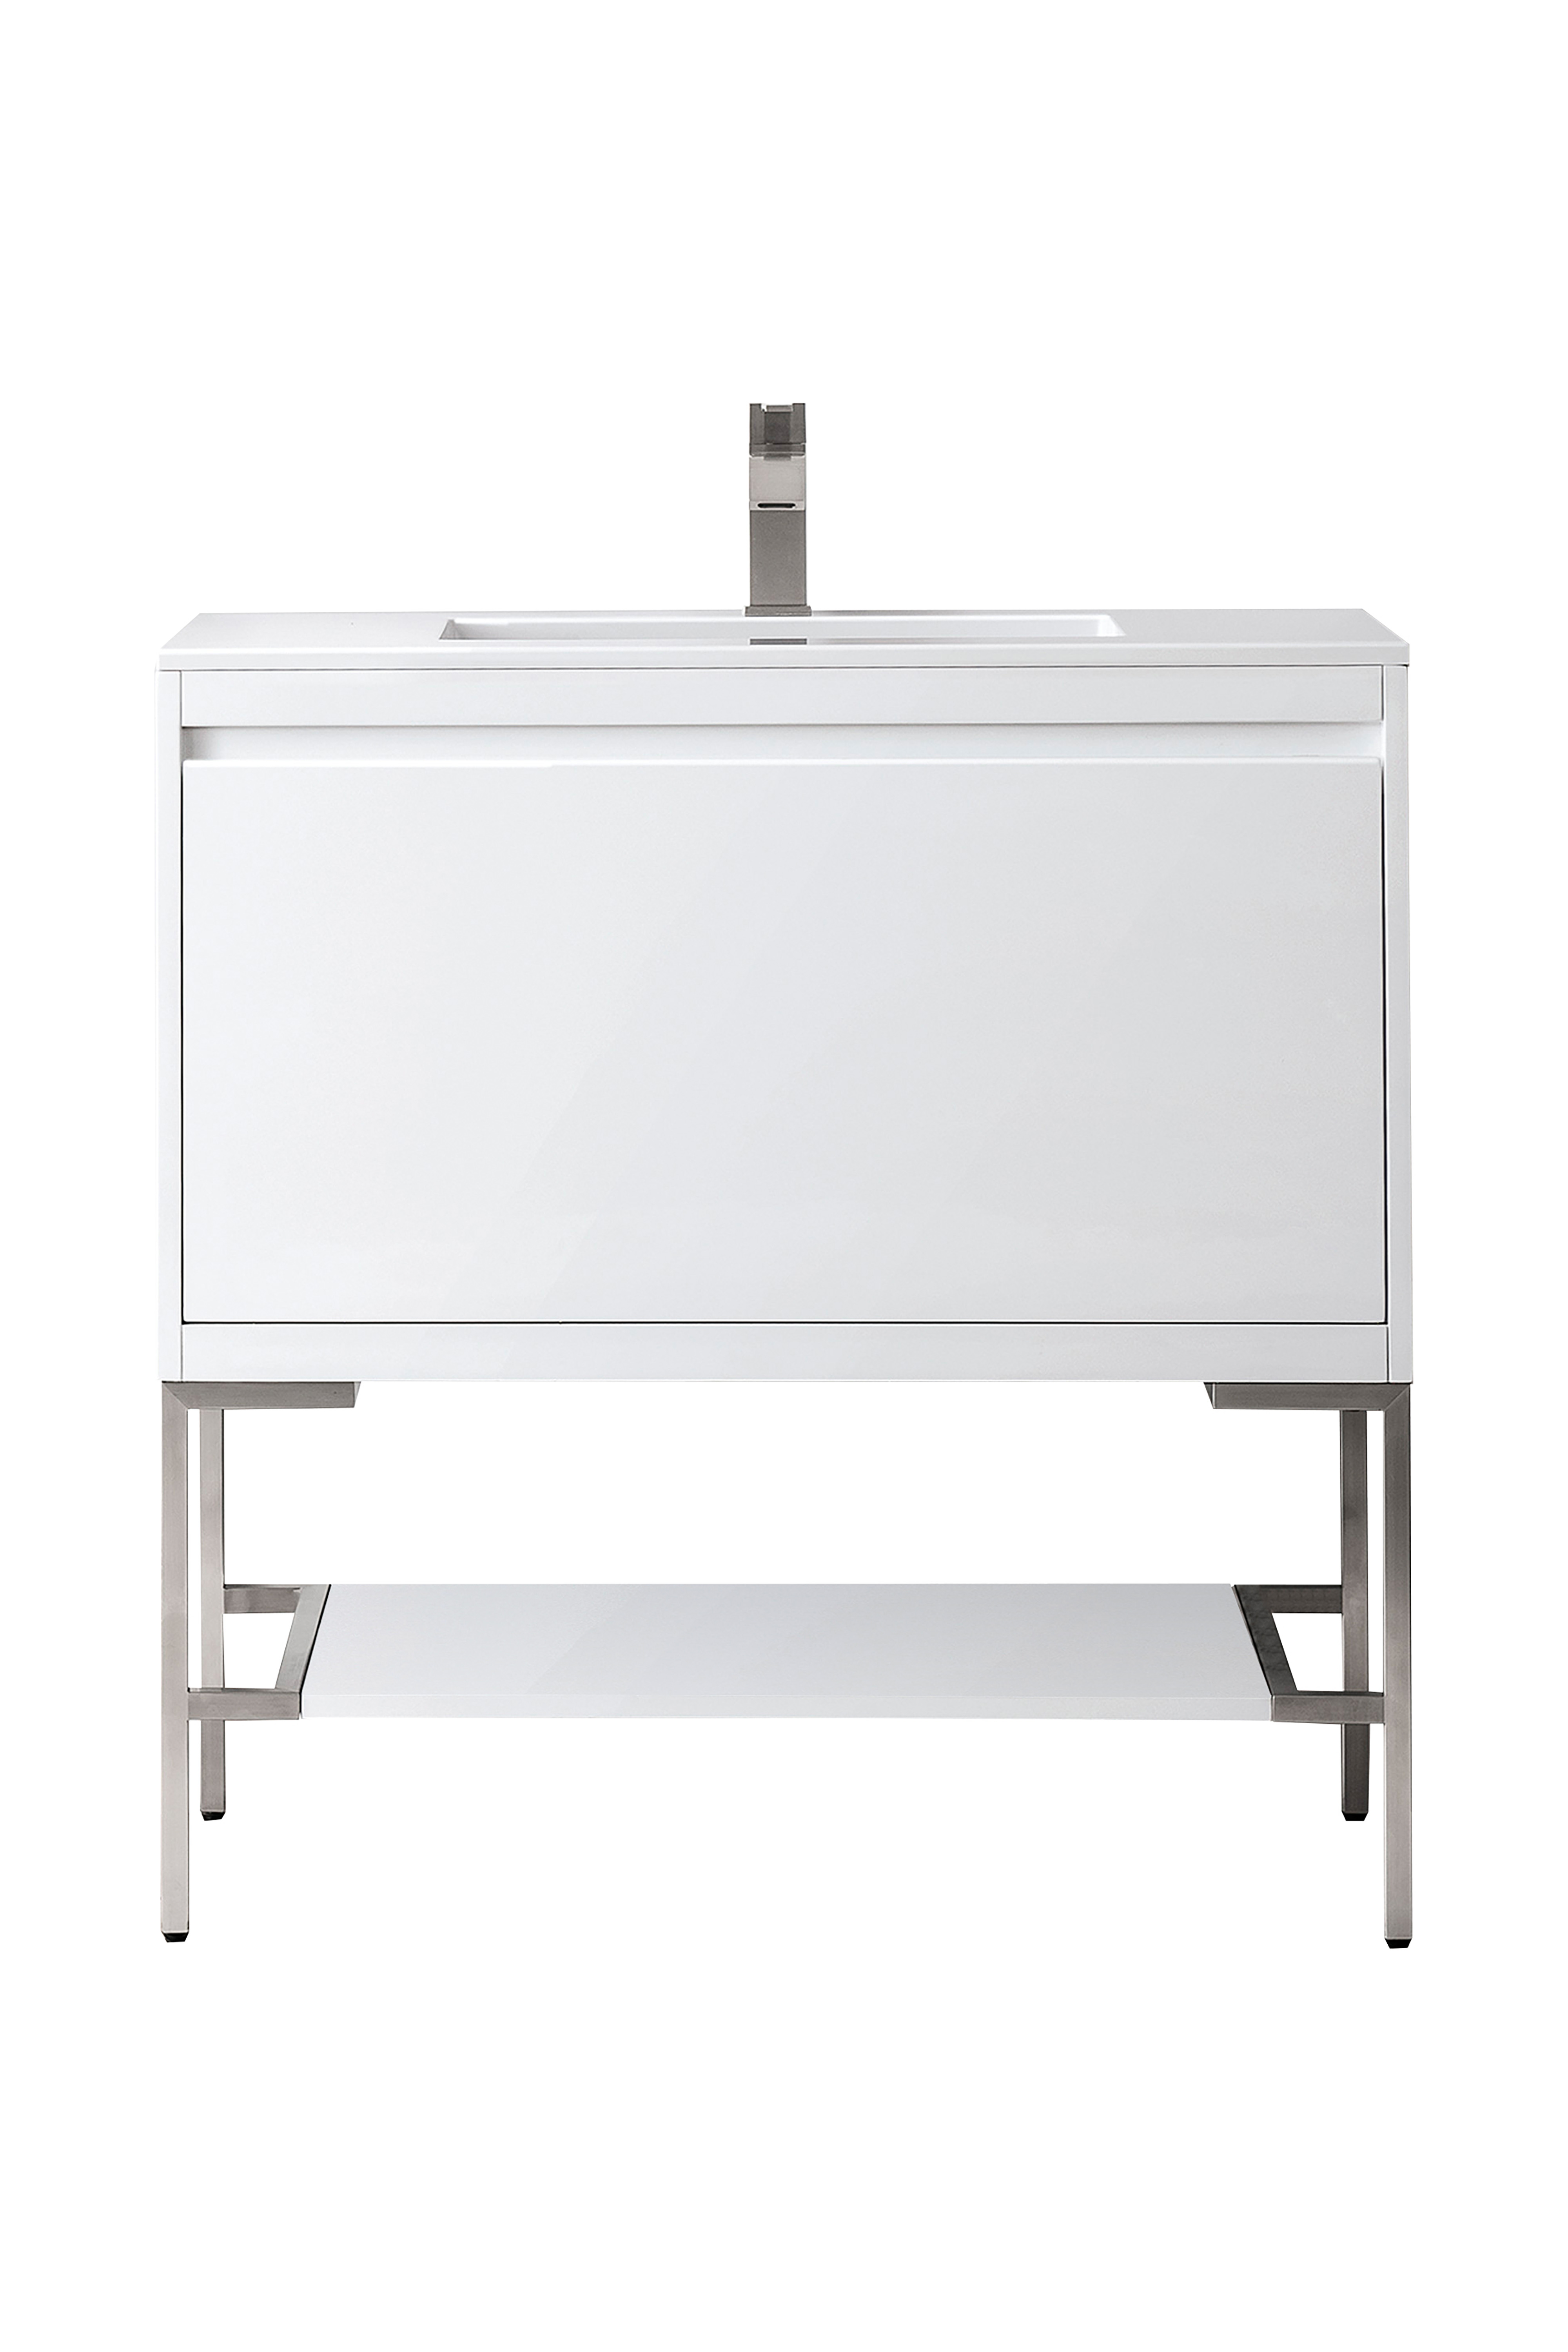 James Martin 801V35.4GWBNKGW Milan 35.4" Single Vanity Cabinet, Glossy White, Brushed Nickel w/Glossy White Composite Top